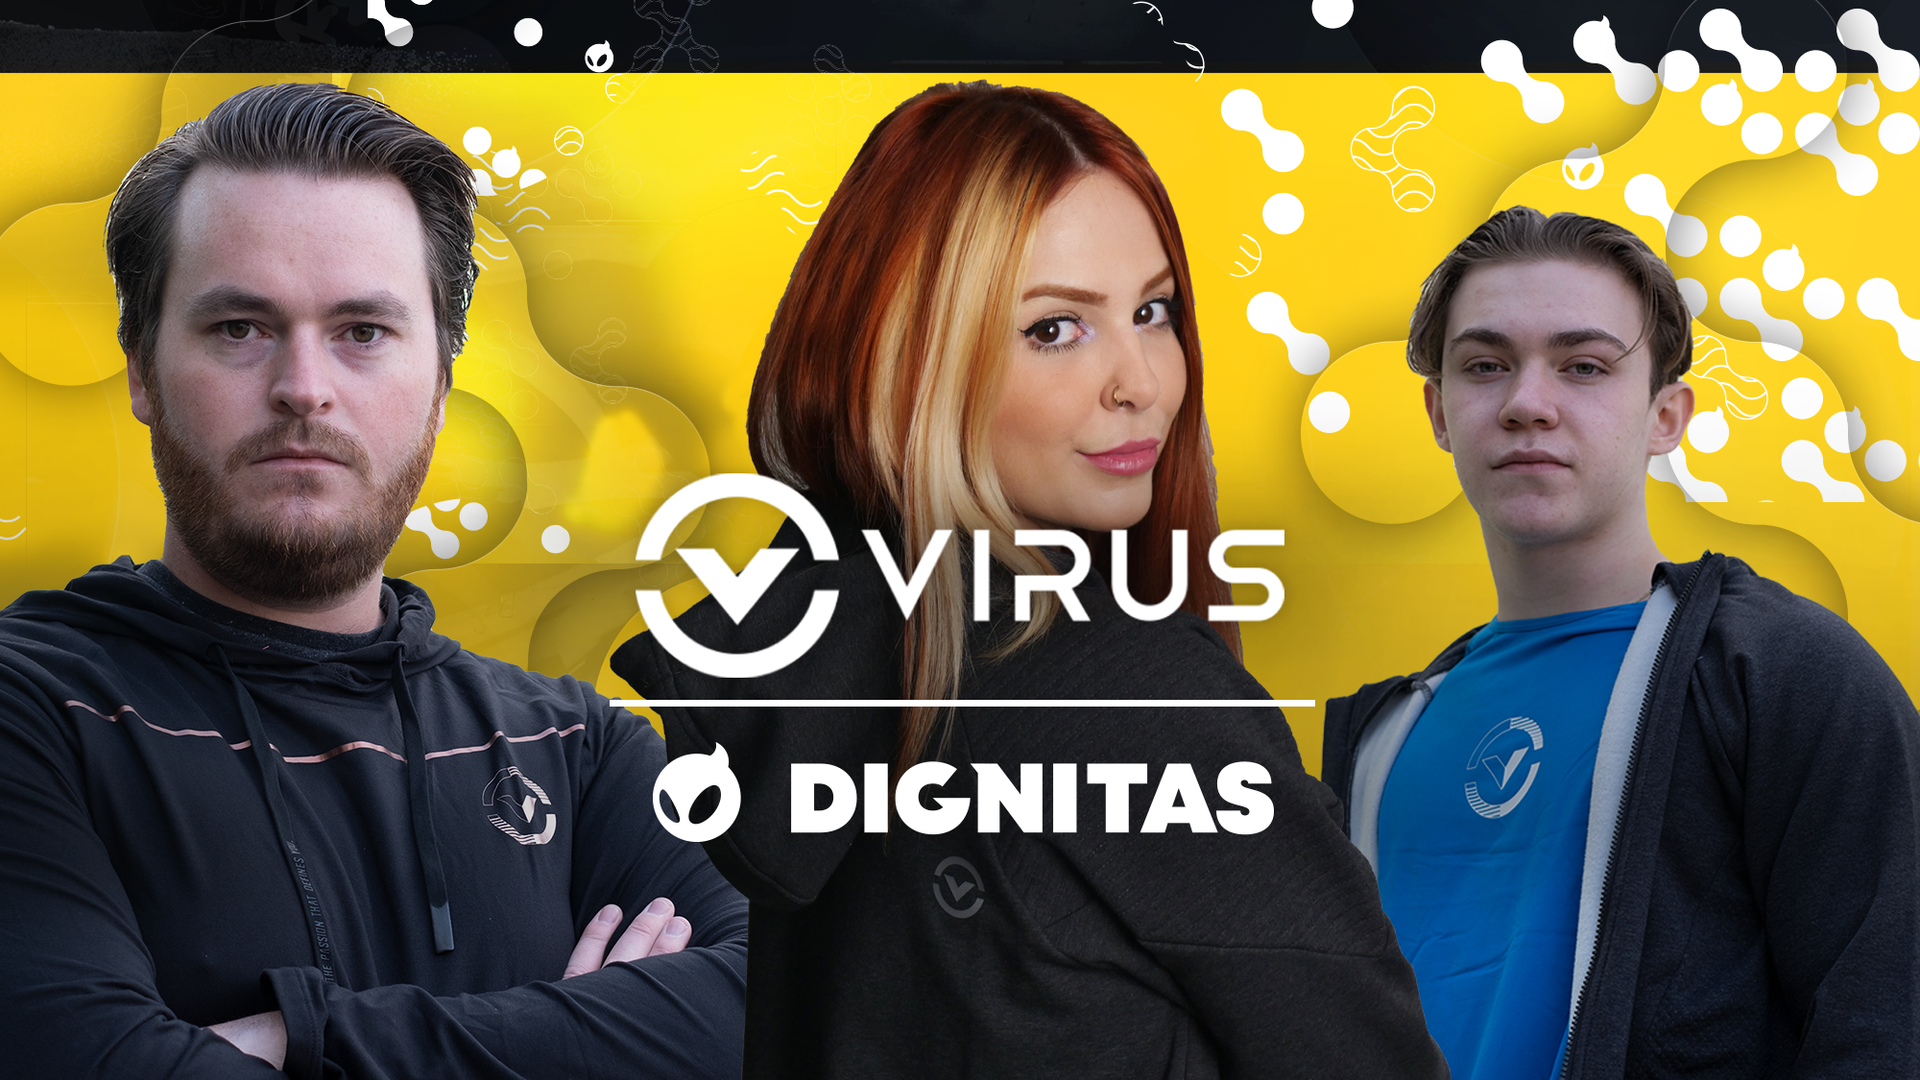 friberg, showliana and HEAP show-off apparel from VIRUS International, Dignitas' Official Game Day Apparel Partner